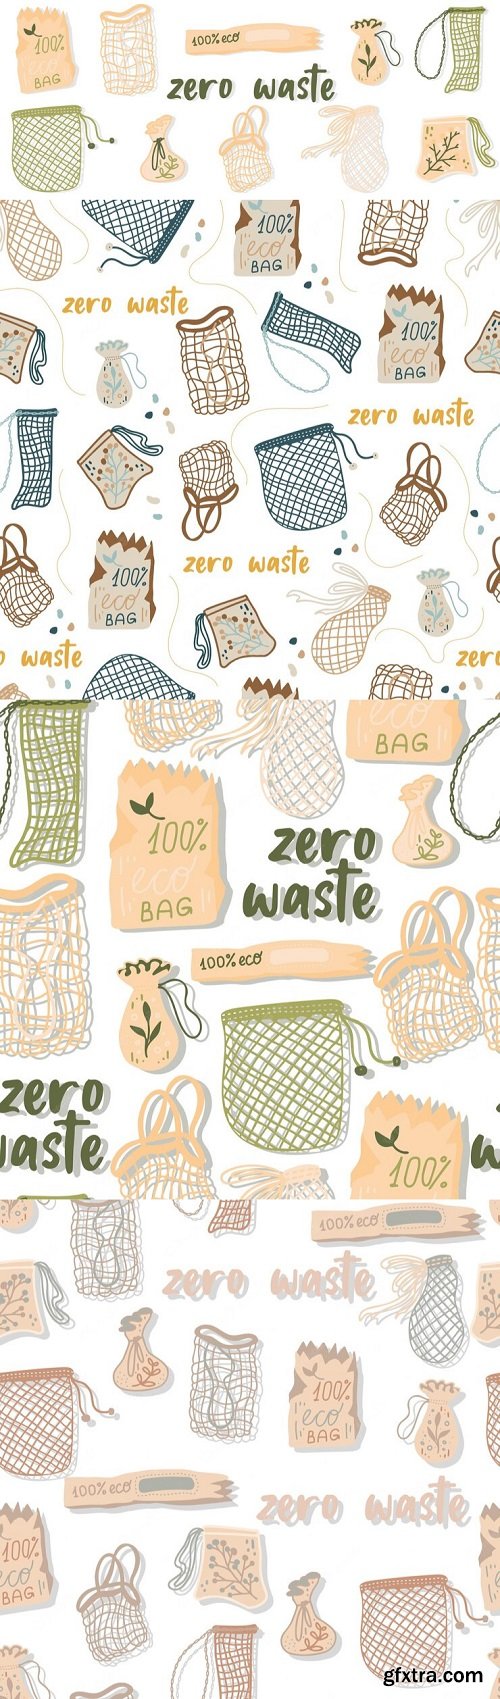 Mesh or mesh shopping bags for eco friendly living vector